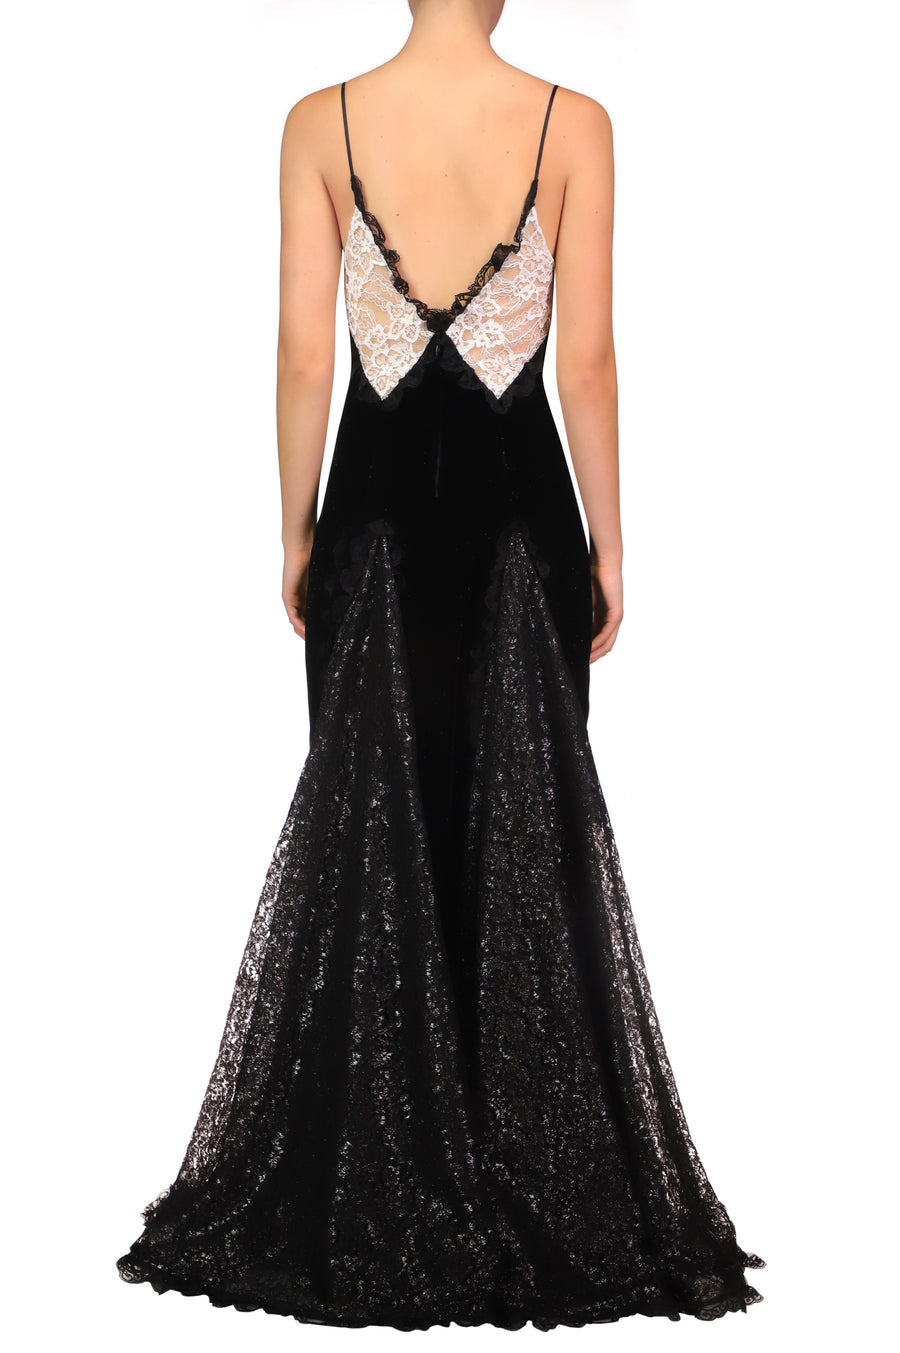 Metallic Black And White Lace And Velvet Gown With Lace Godets